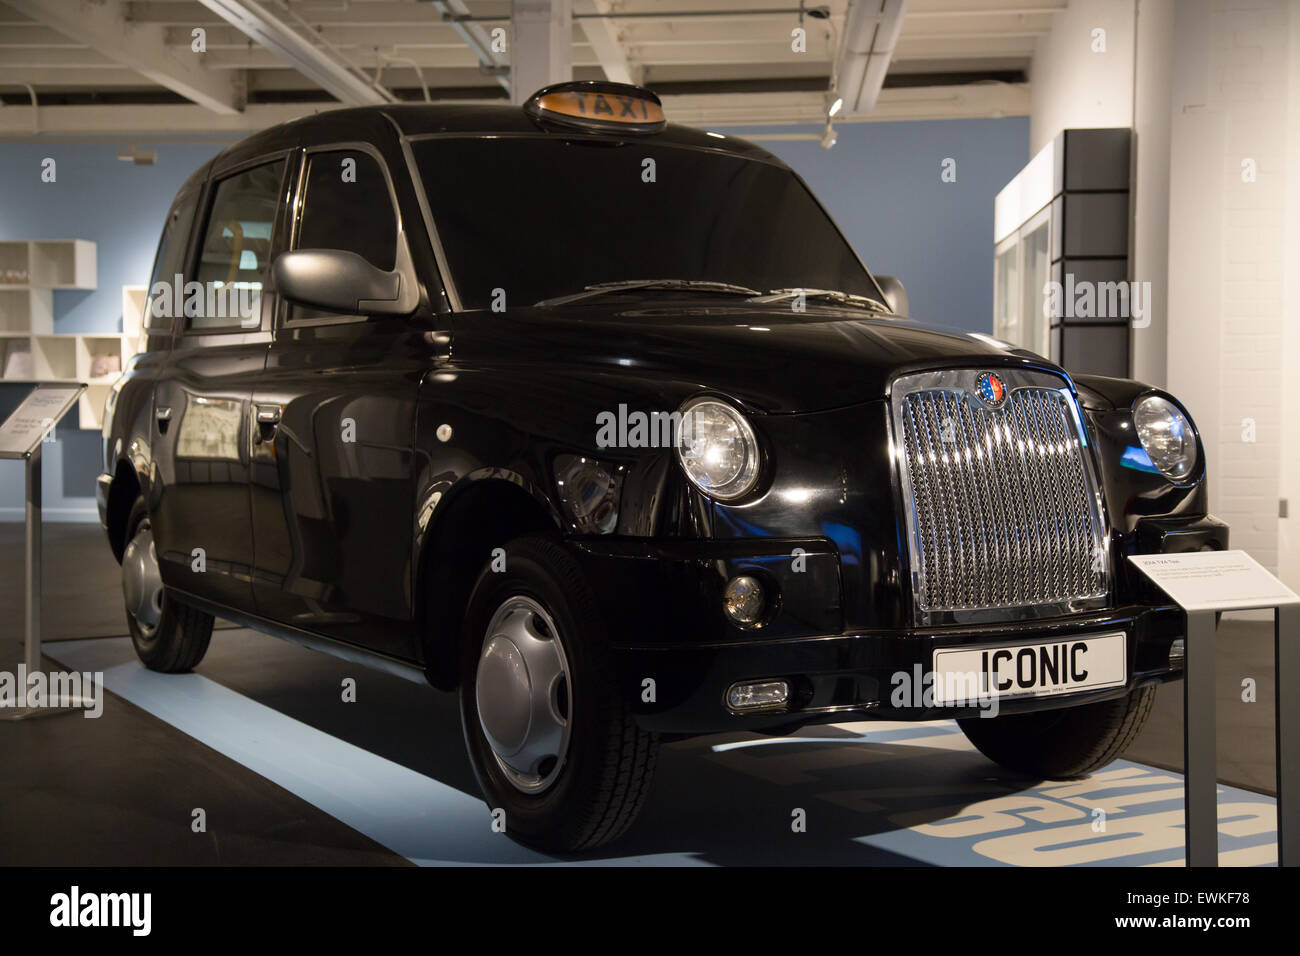 Iconic black taxi cab on display at Coventry Transport Museum Stock Photo